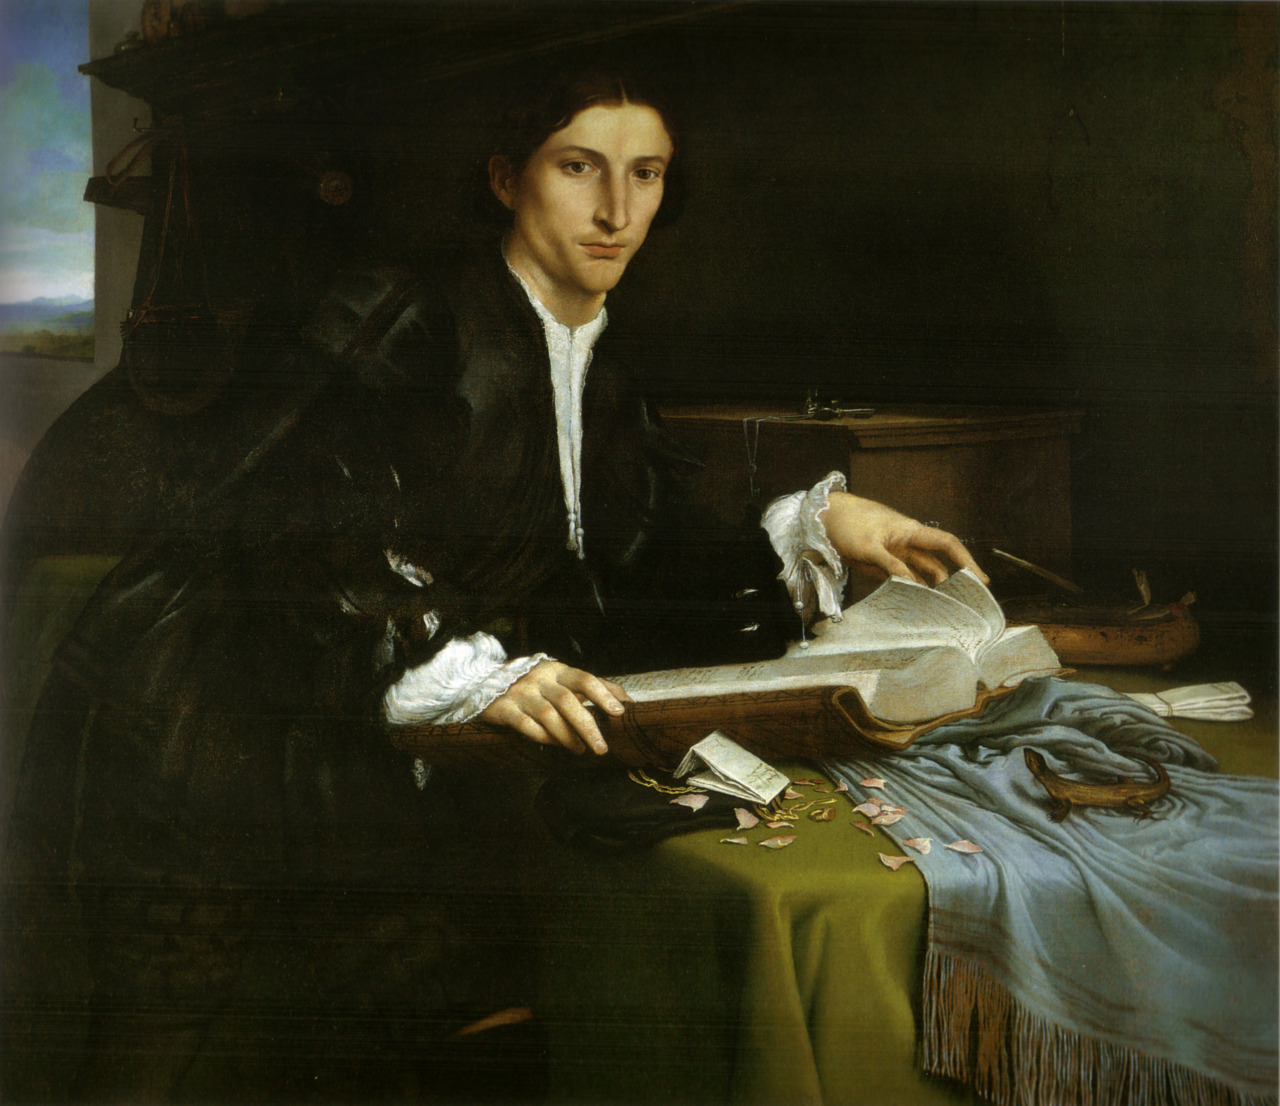 Portrait of a Gentleman in his Study (c.1530). Lorenzo Lotto (Italian, c.1480-1556). Oil on canvas. Gallerie dell'Accademia, Venice.
The pale young man with his finely tapered face is caught in a moment of yearning thoughtfulness as his fingers leaf...